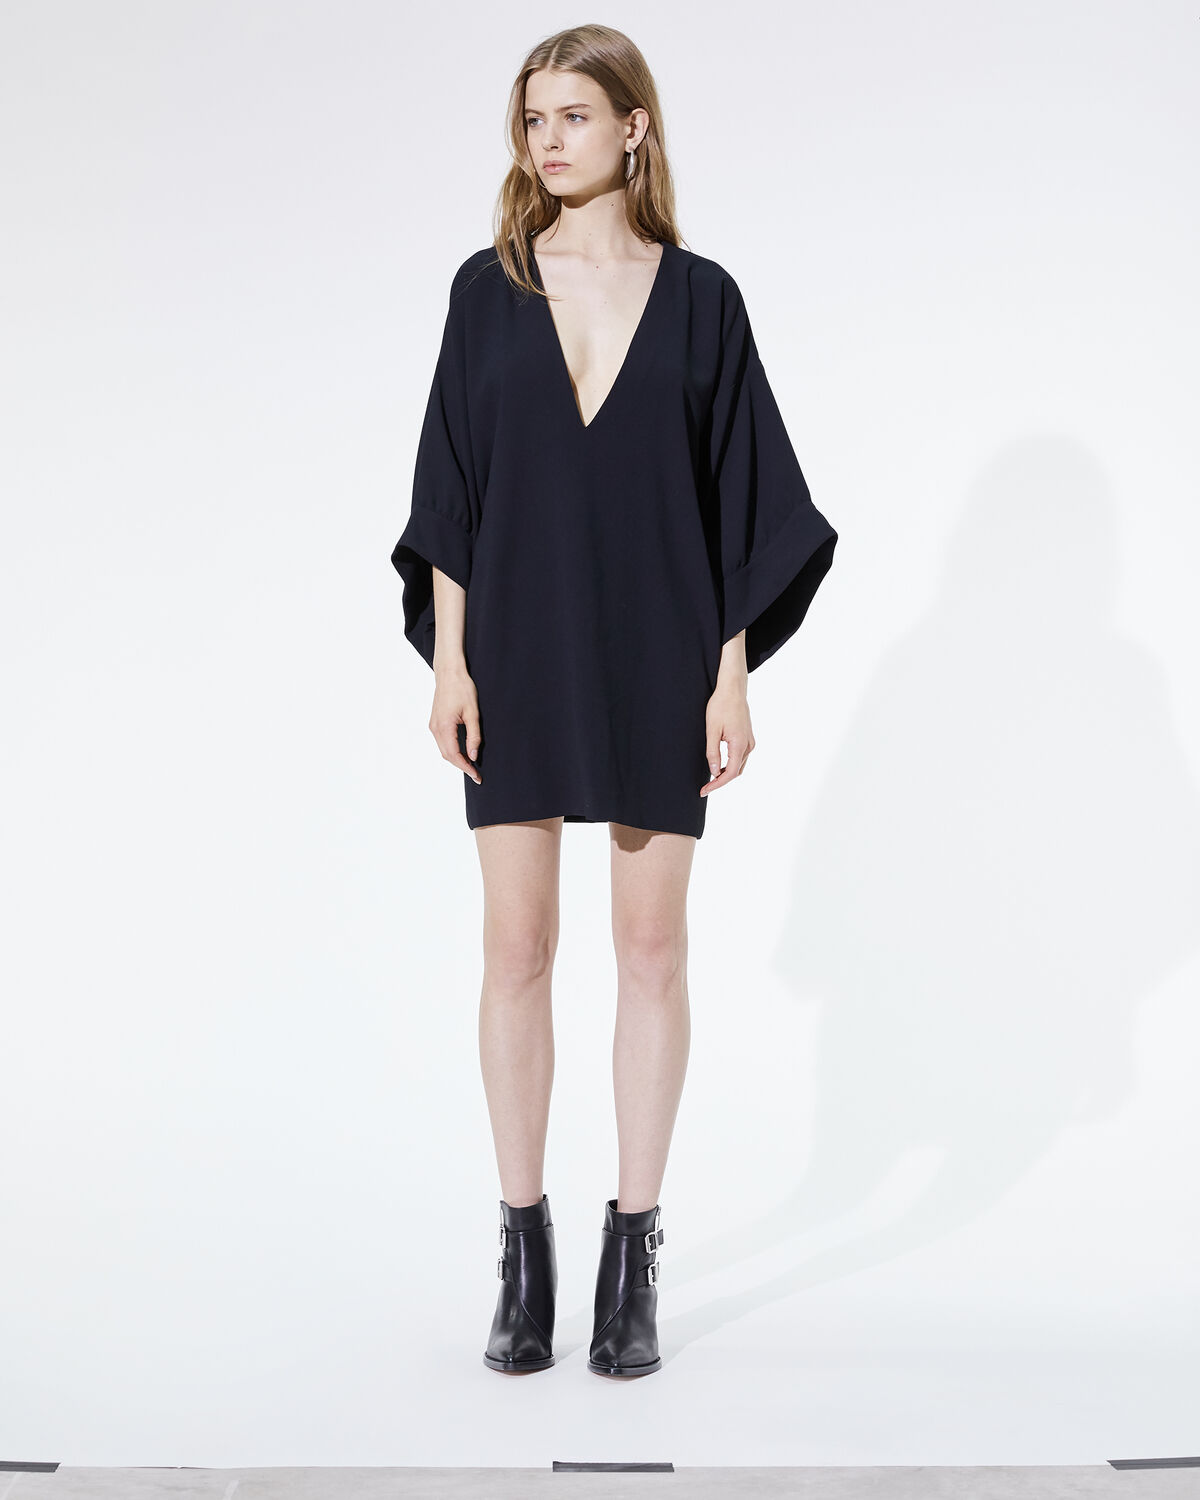 Photo of IRO Paris Bahoma Dress Black - Resolutely Feminine, This Dress Is Distinguished By Its Wide And Flared Sleeves As Well As Its Deep V Neckline. Accompany It With A Pair Of Boots For A Modern Look. Dresses